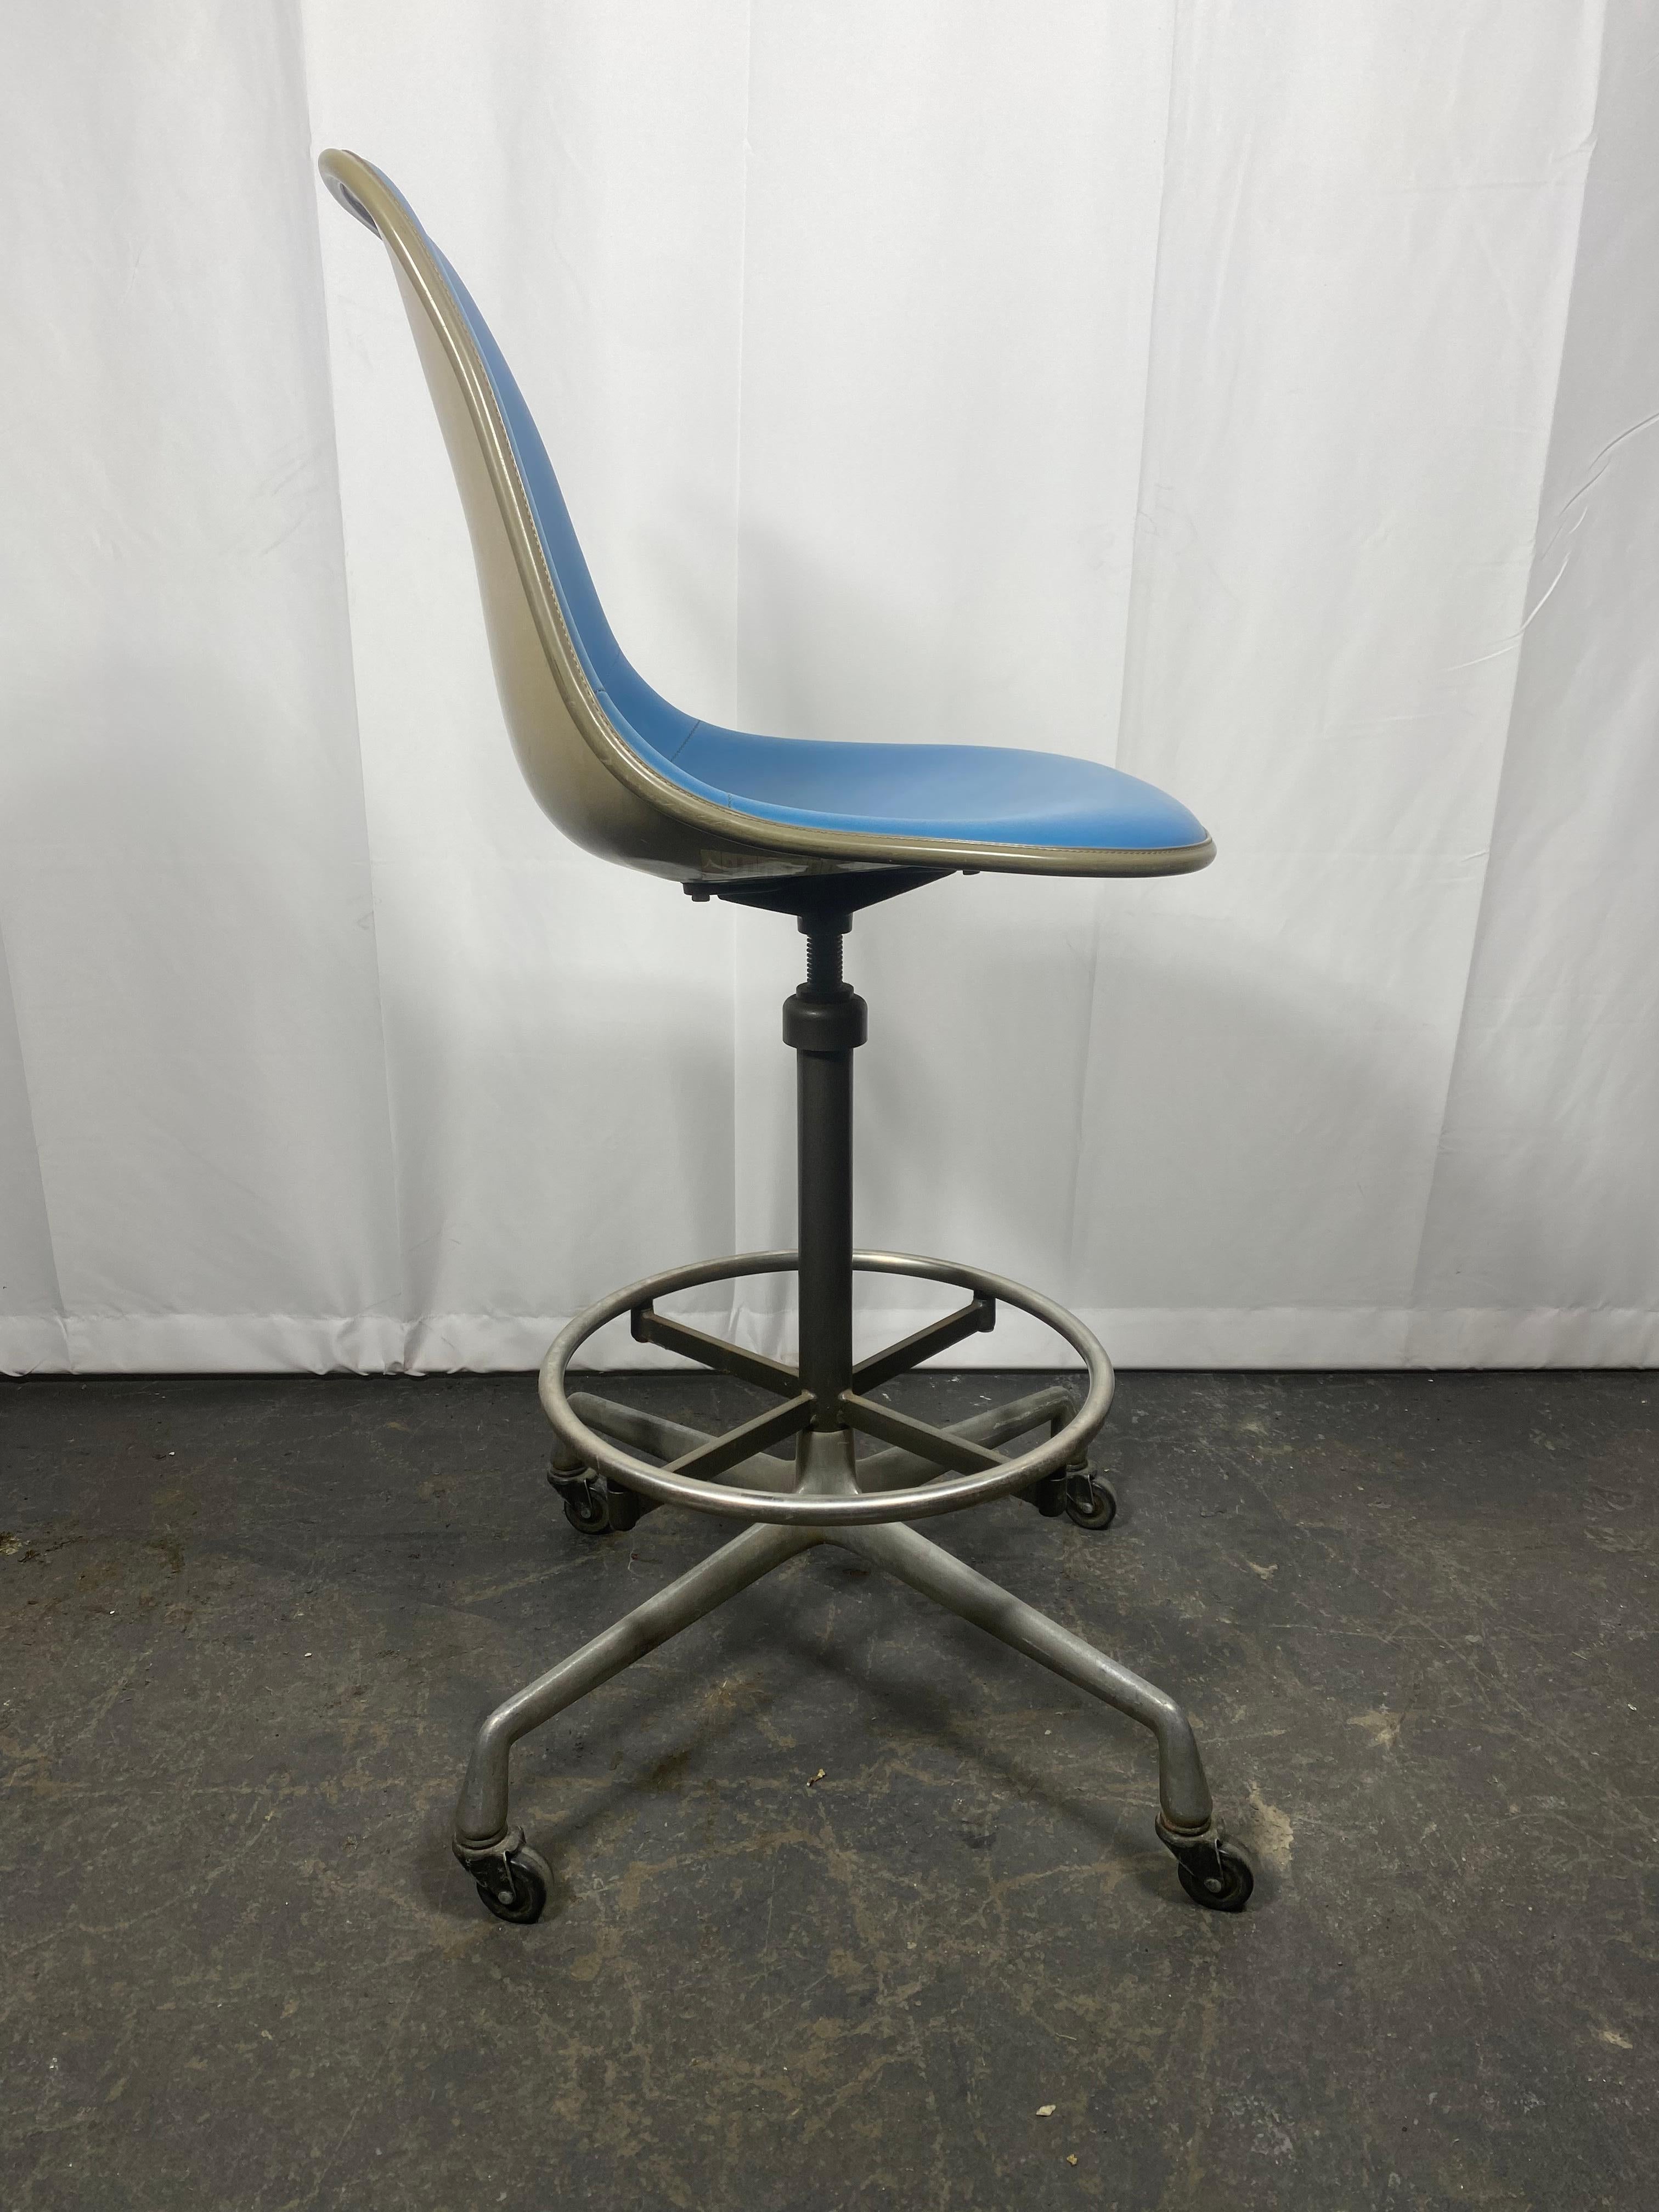 Mid-Century Modern Charles and Ray Eames Drafting Stool for Herman Miller , castors. c.1974 